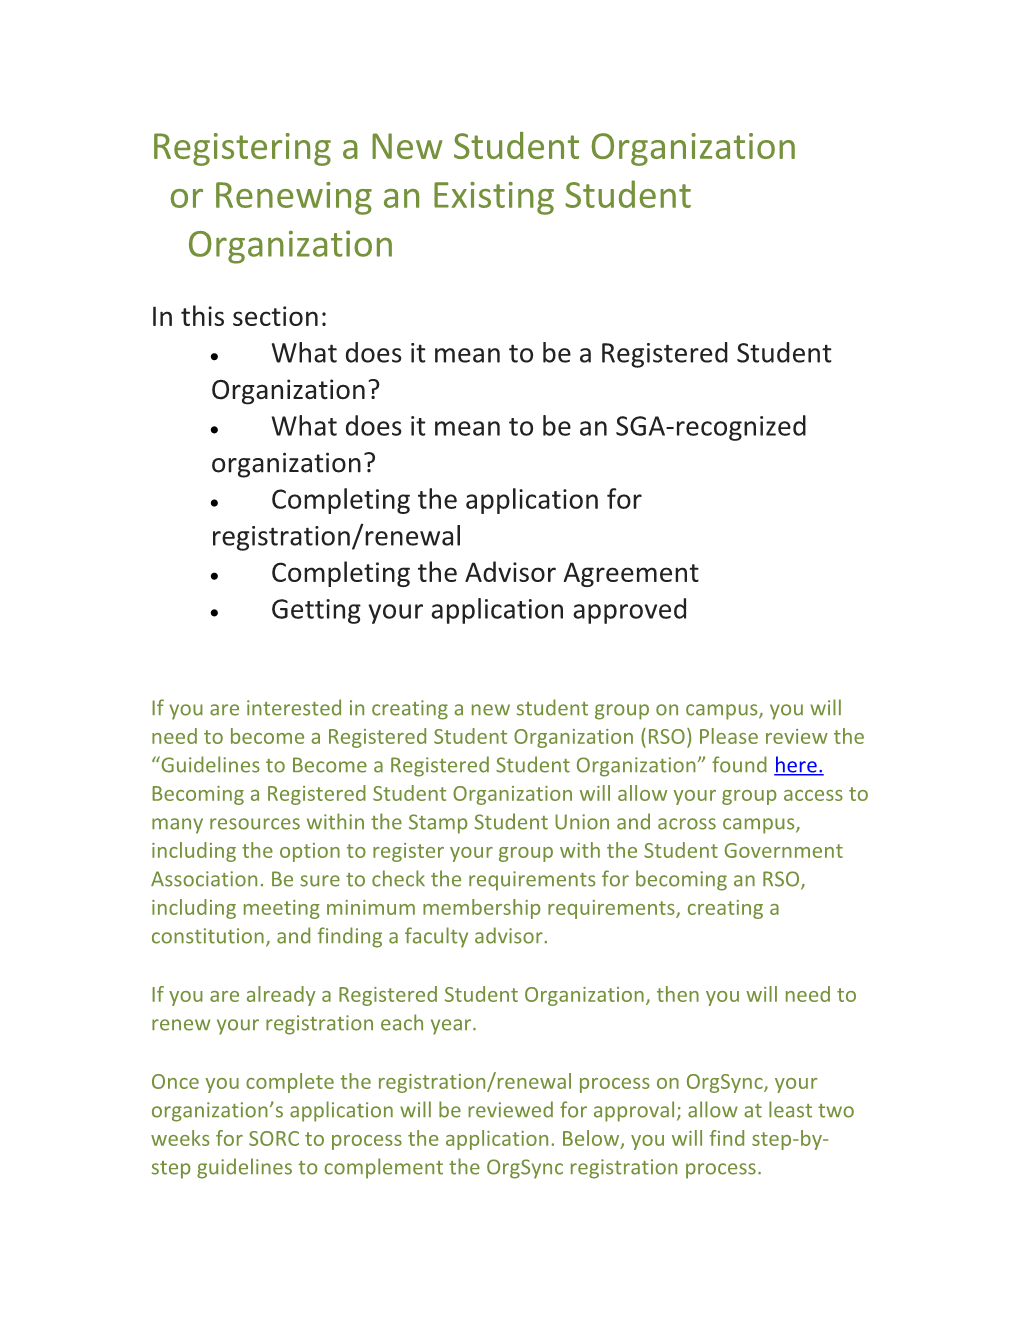 Registering a New Student Organization Or Renewing an Existing Student Organization